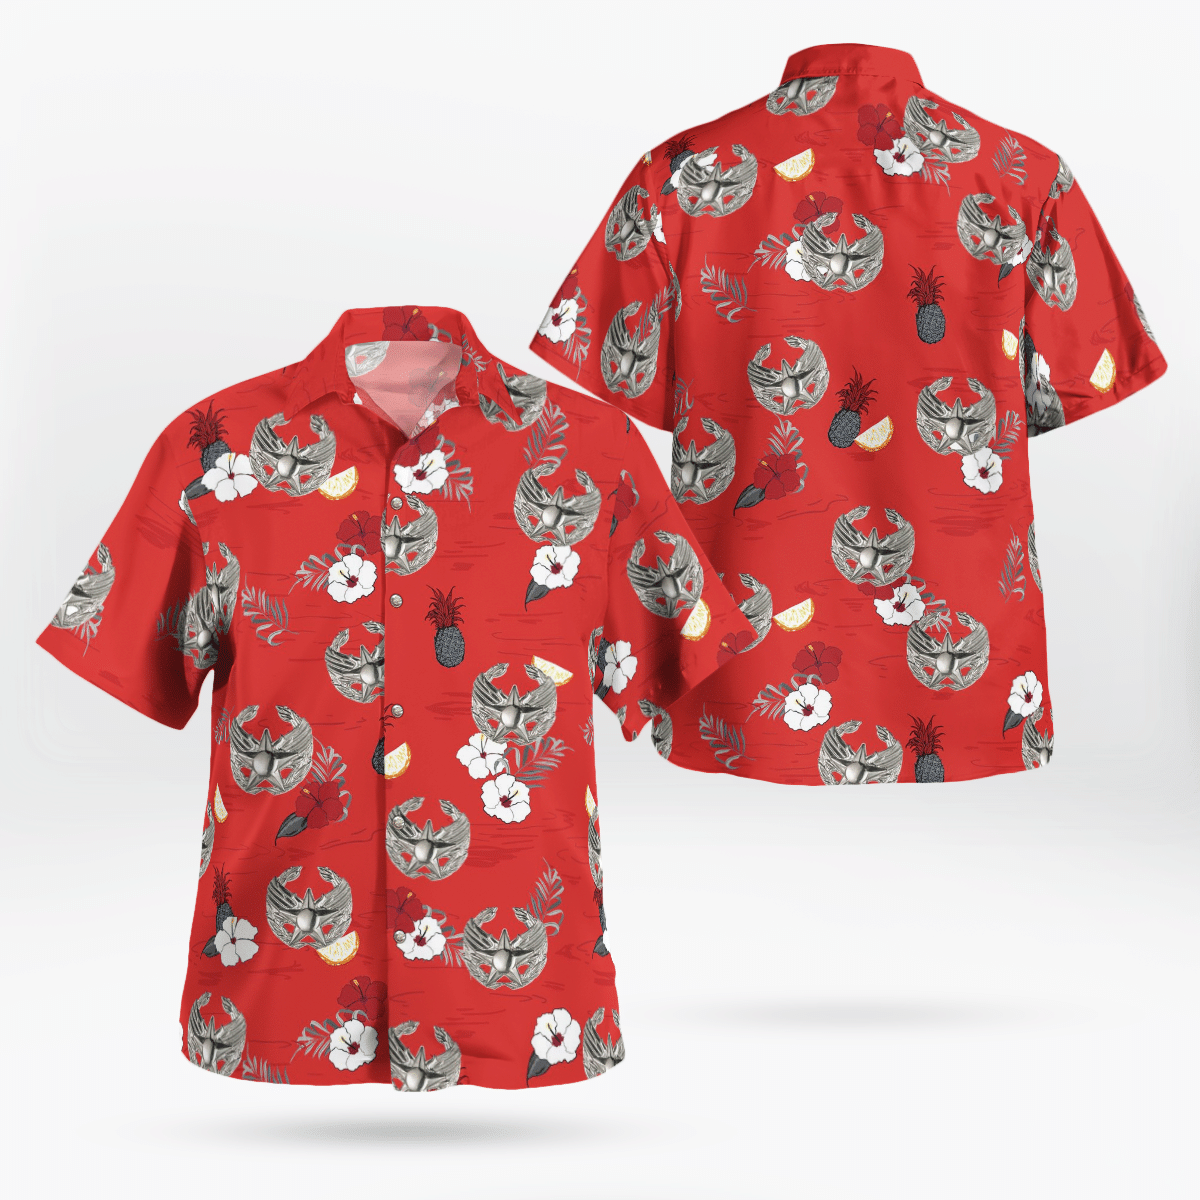 If you are in need of a new summertime look, pick up this Hawaiian shirt 54